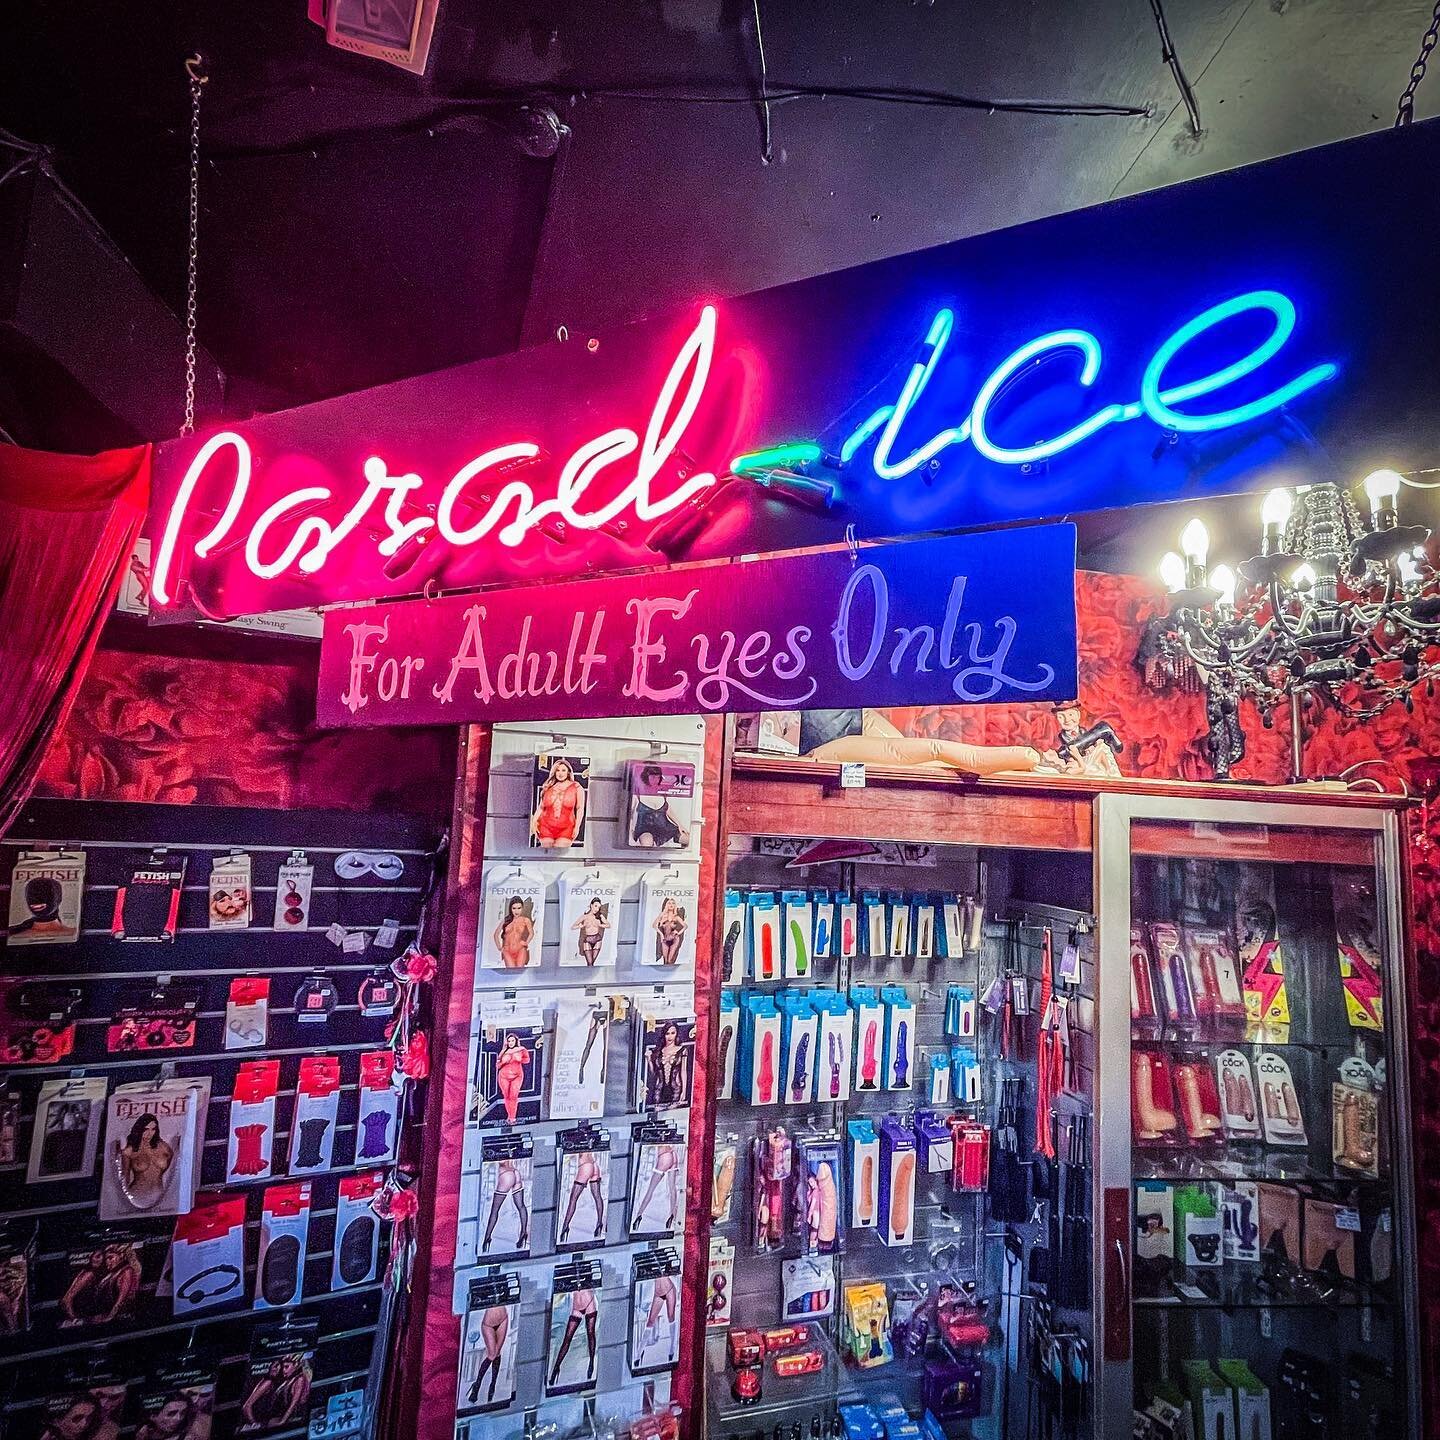 Still looking for that last minute 😉naughty valentines gift? We&rsquo;ve got you covered. #adultgifts #sextoystore #valentines #valentinesdaygifts #paradice #icenine #nottingham #independent #independantbusiness